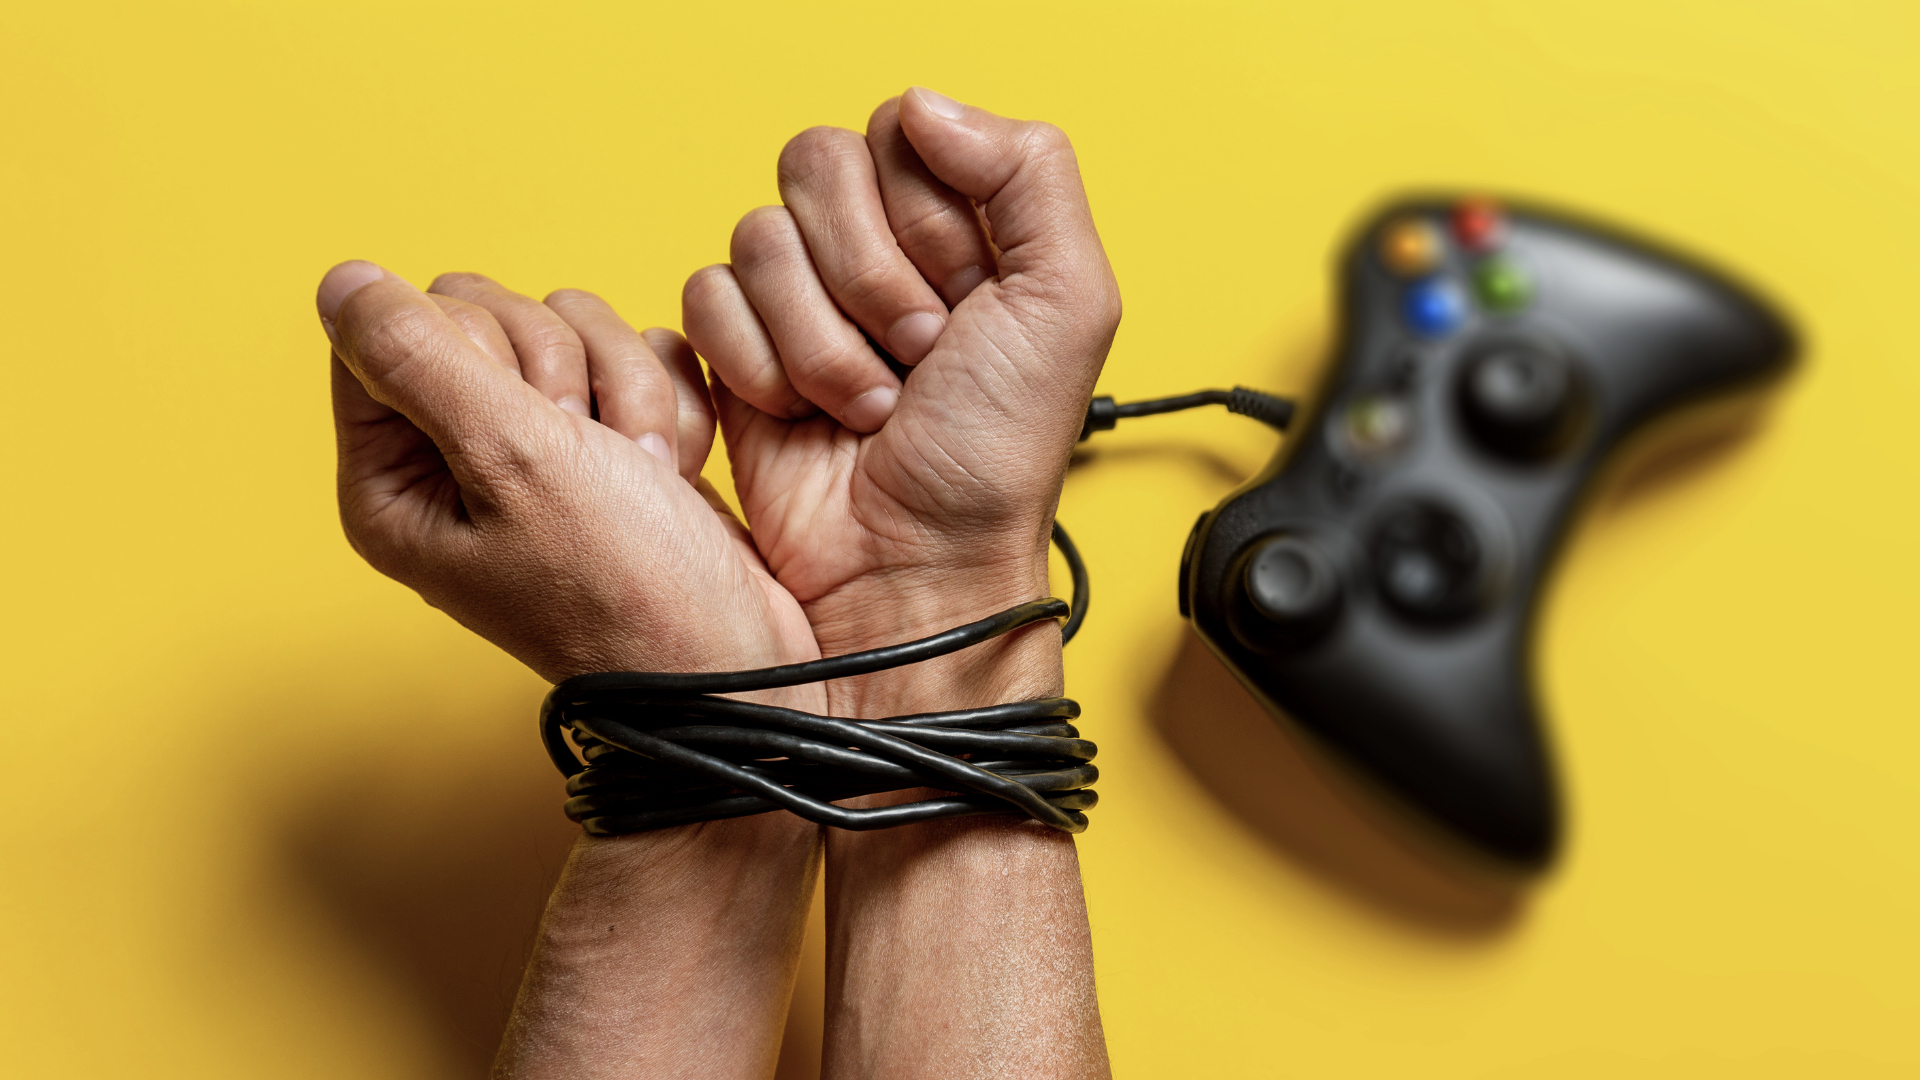 Video Games and Their Impact on Teens' Mental Health